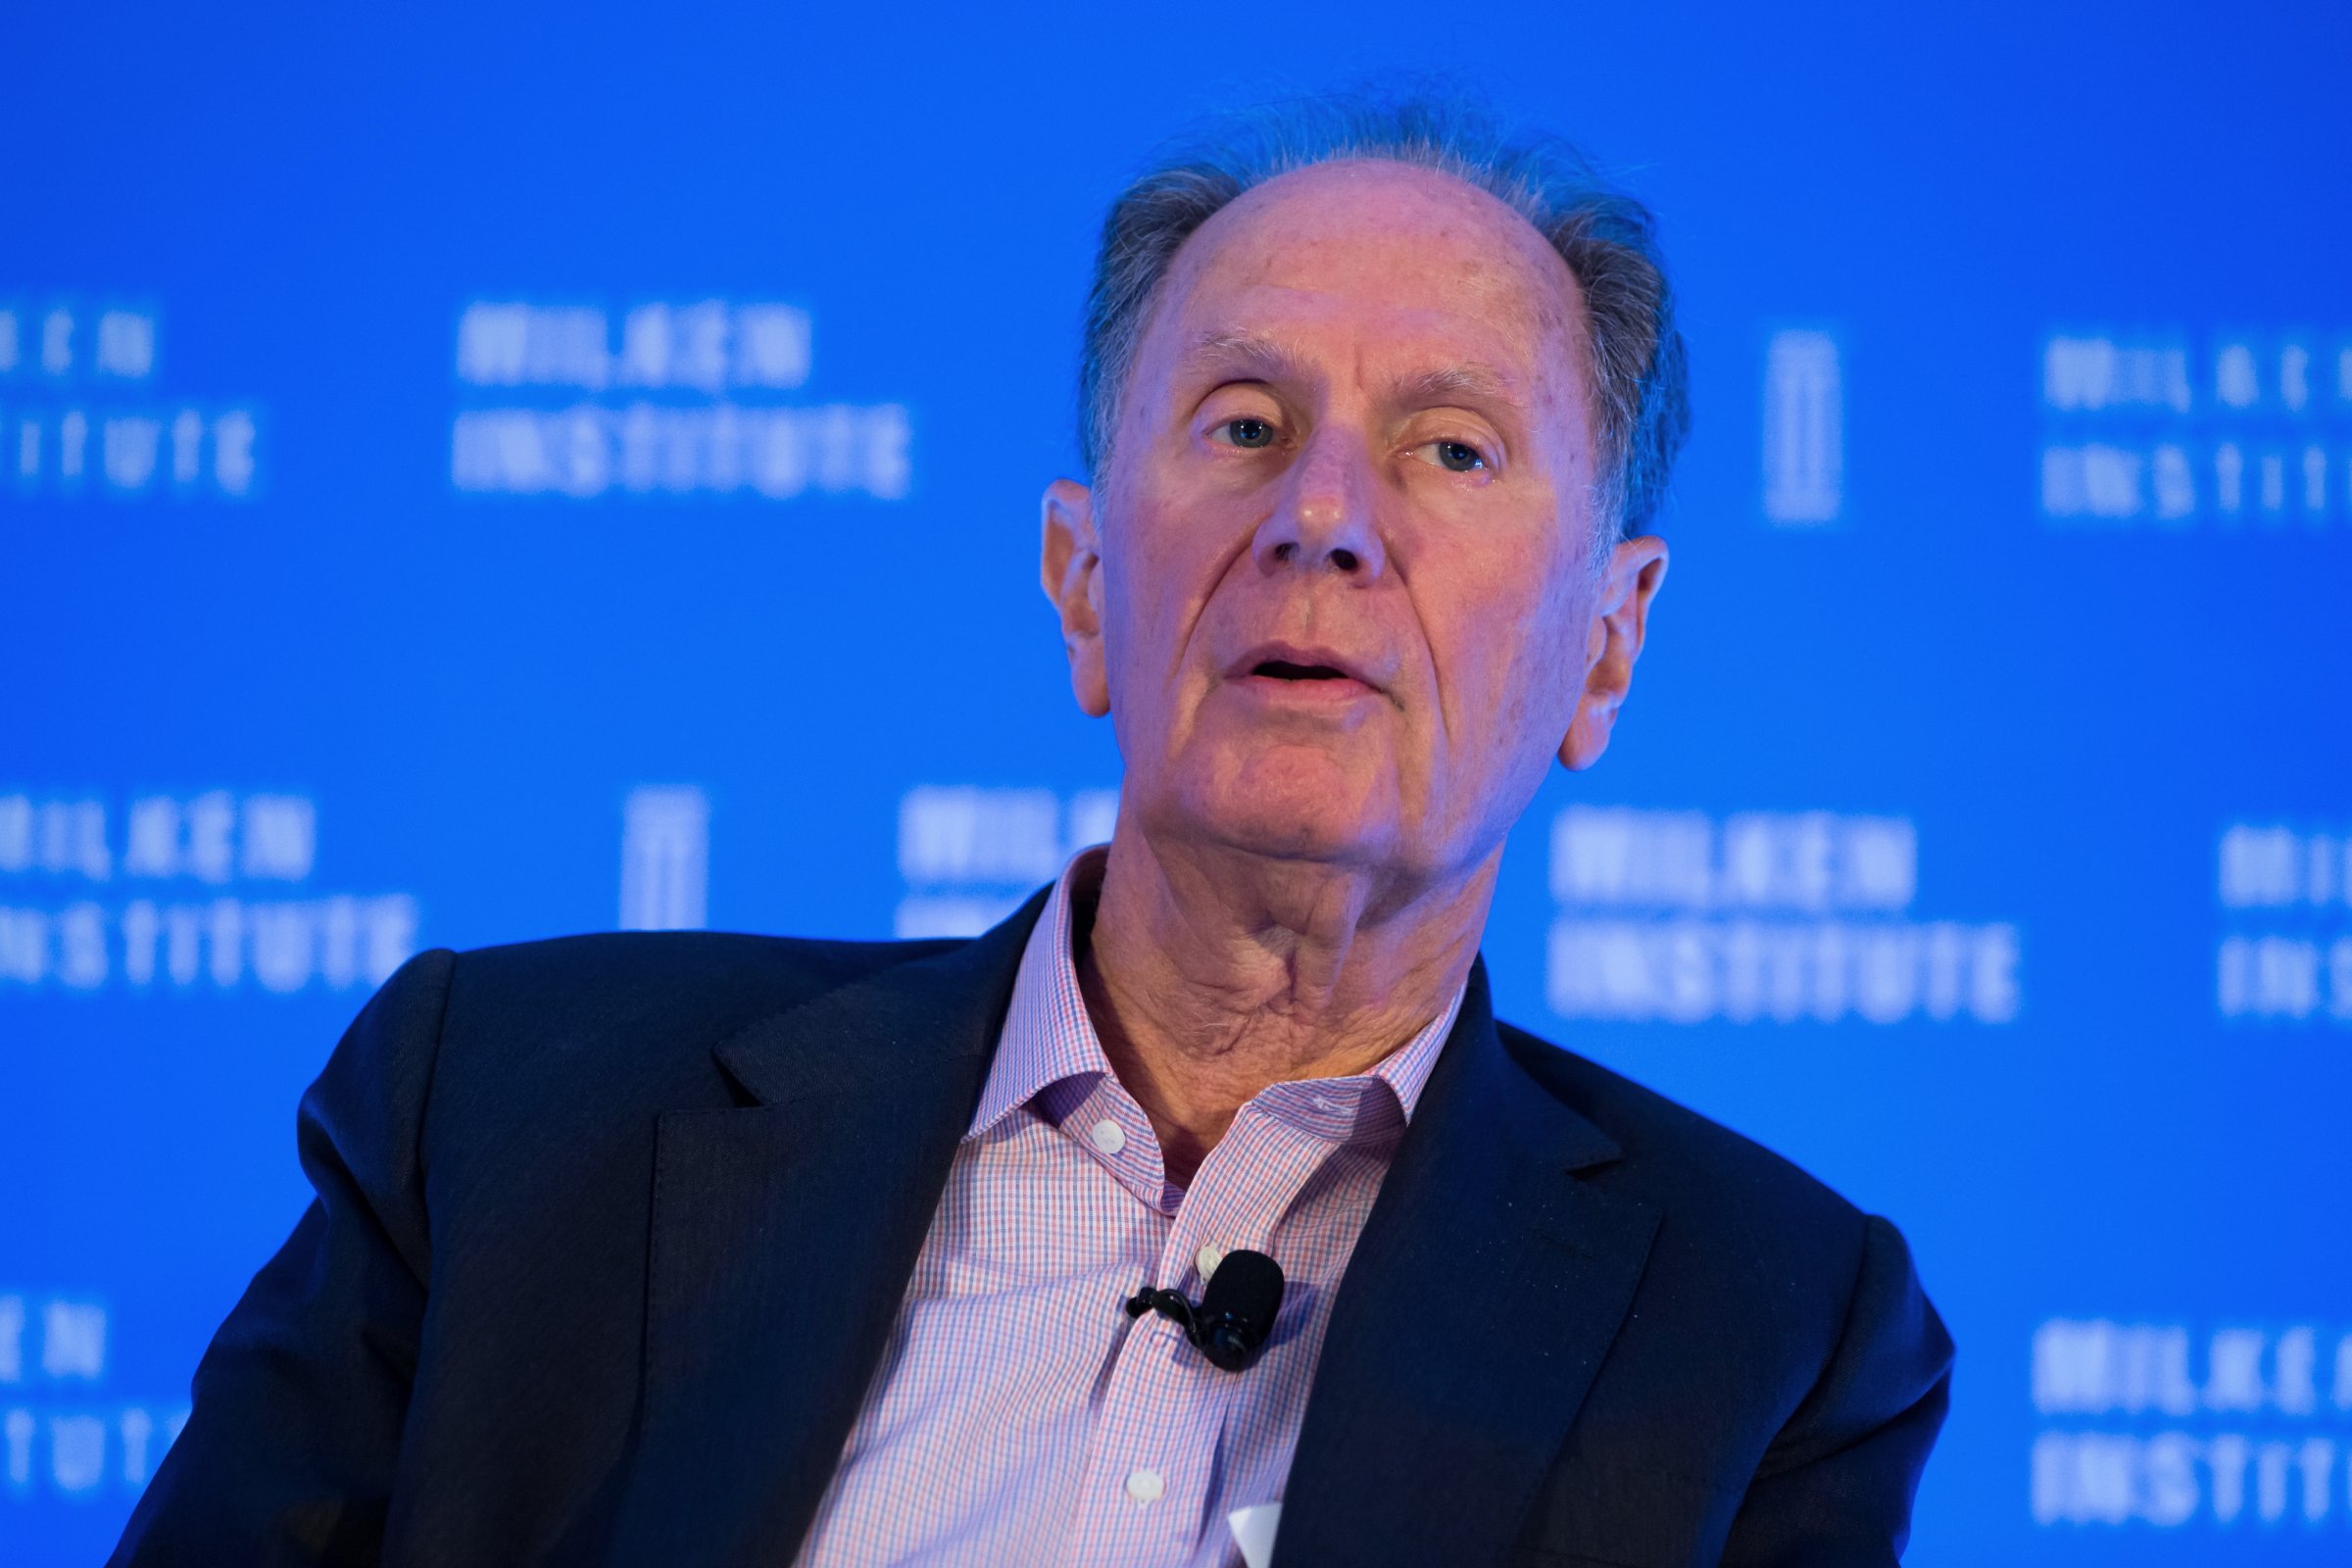 Key Interviews and Speakers At The Milken Institute Asia Summit